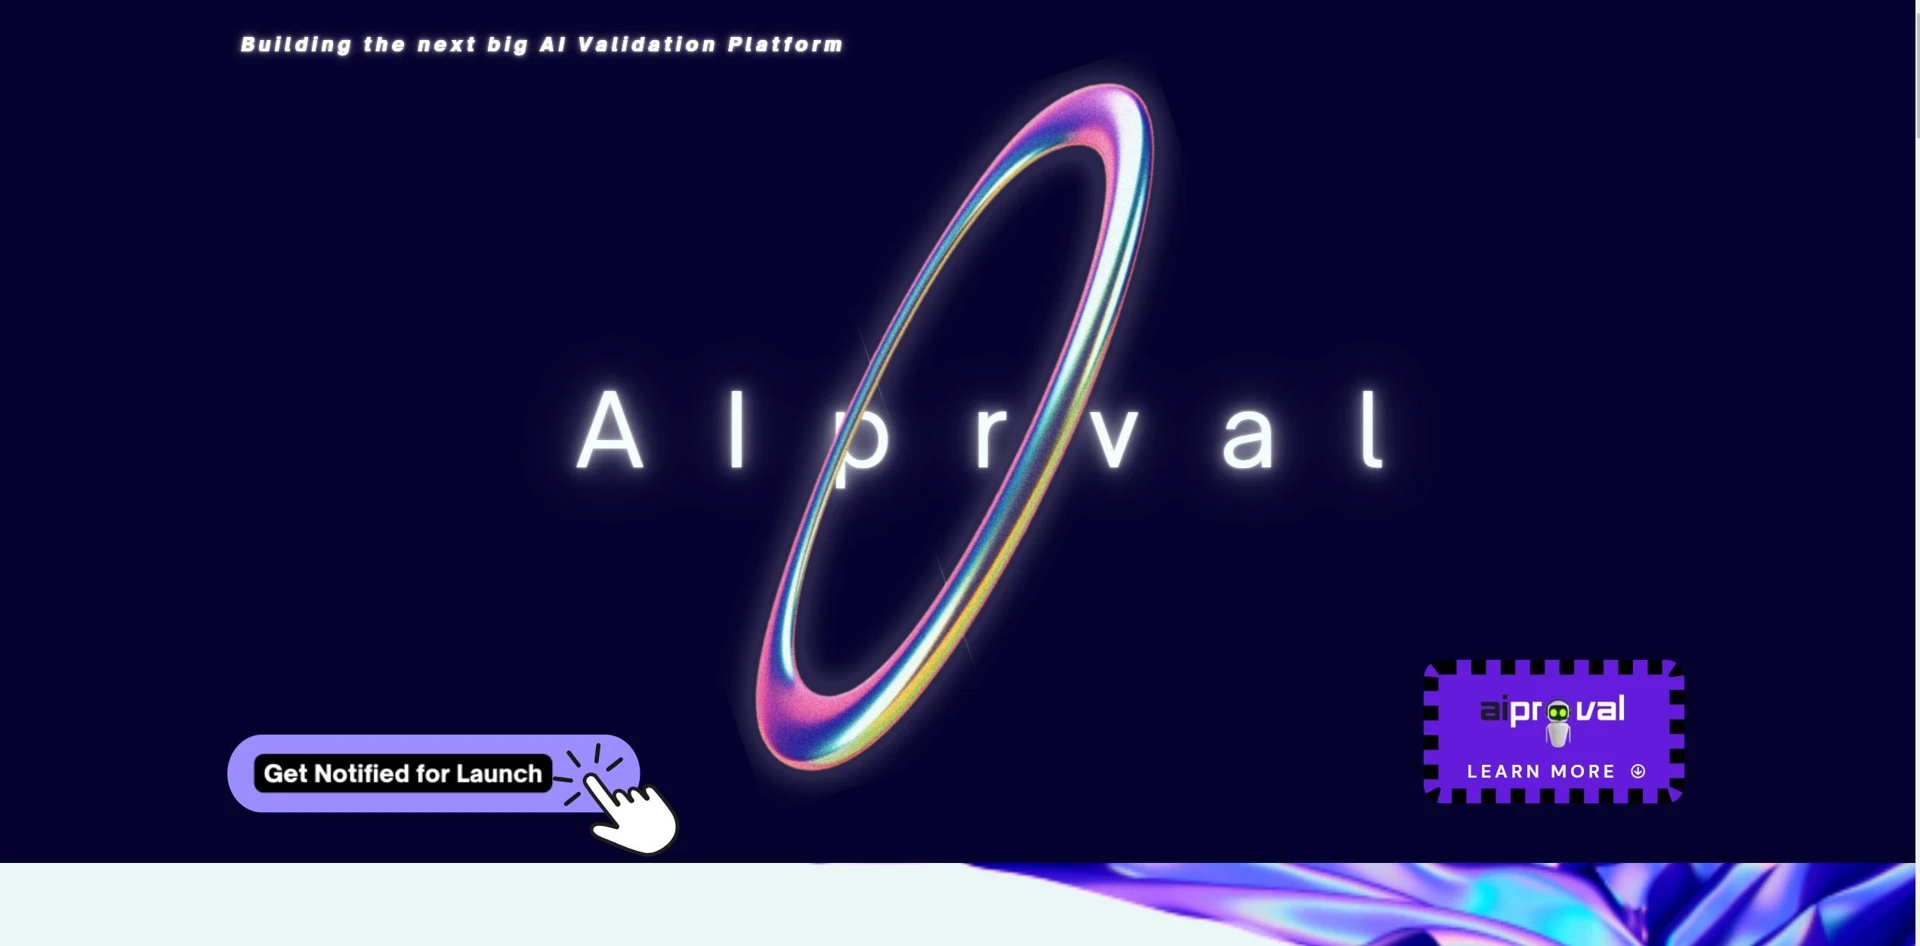 AIprovalwebsite picture